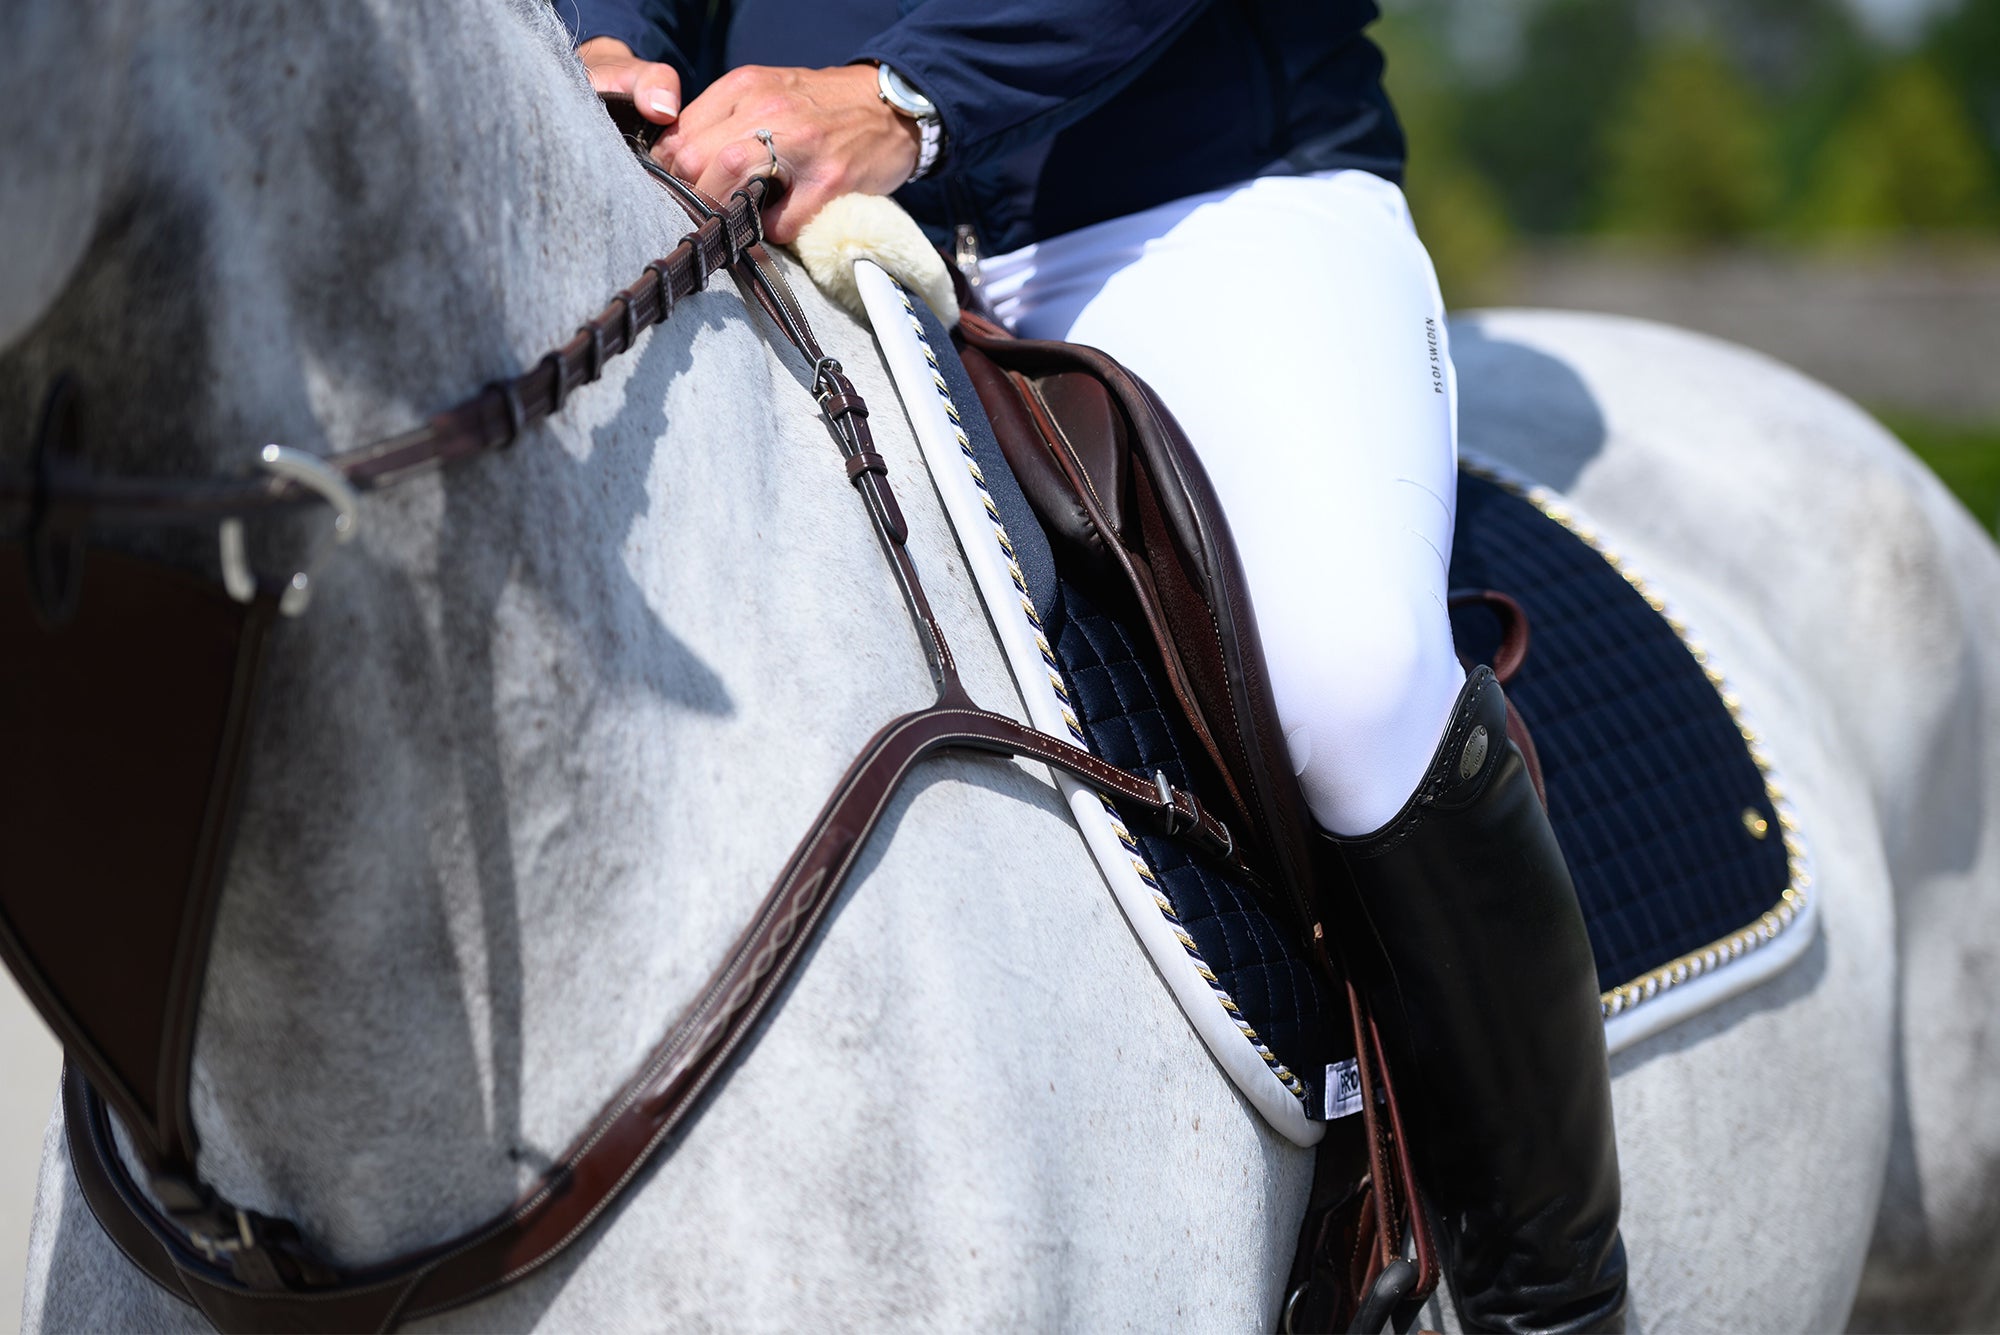 Figure shaped and stretchy breeches giving you maximal movability and the opportunity to perform on top at show jumping competitions. Non-seethrough 4-way-stretch that breathes and transports moisture away, elastic material at the ankles and mid-rise waist with loops. Grip in a pattern of the PS emblem decorates the breeches, together with back pocket imitations with PS buttons.